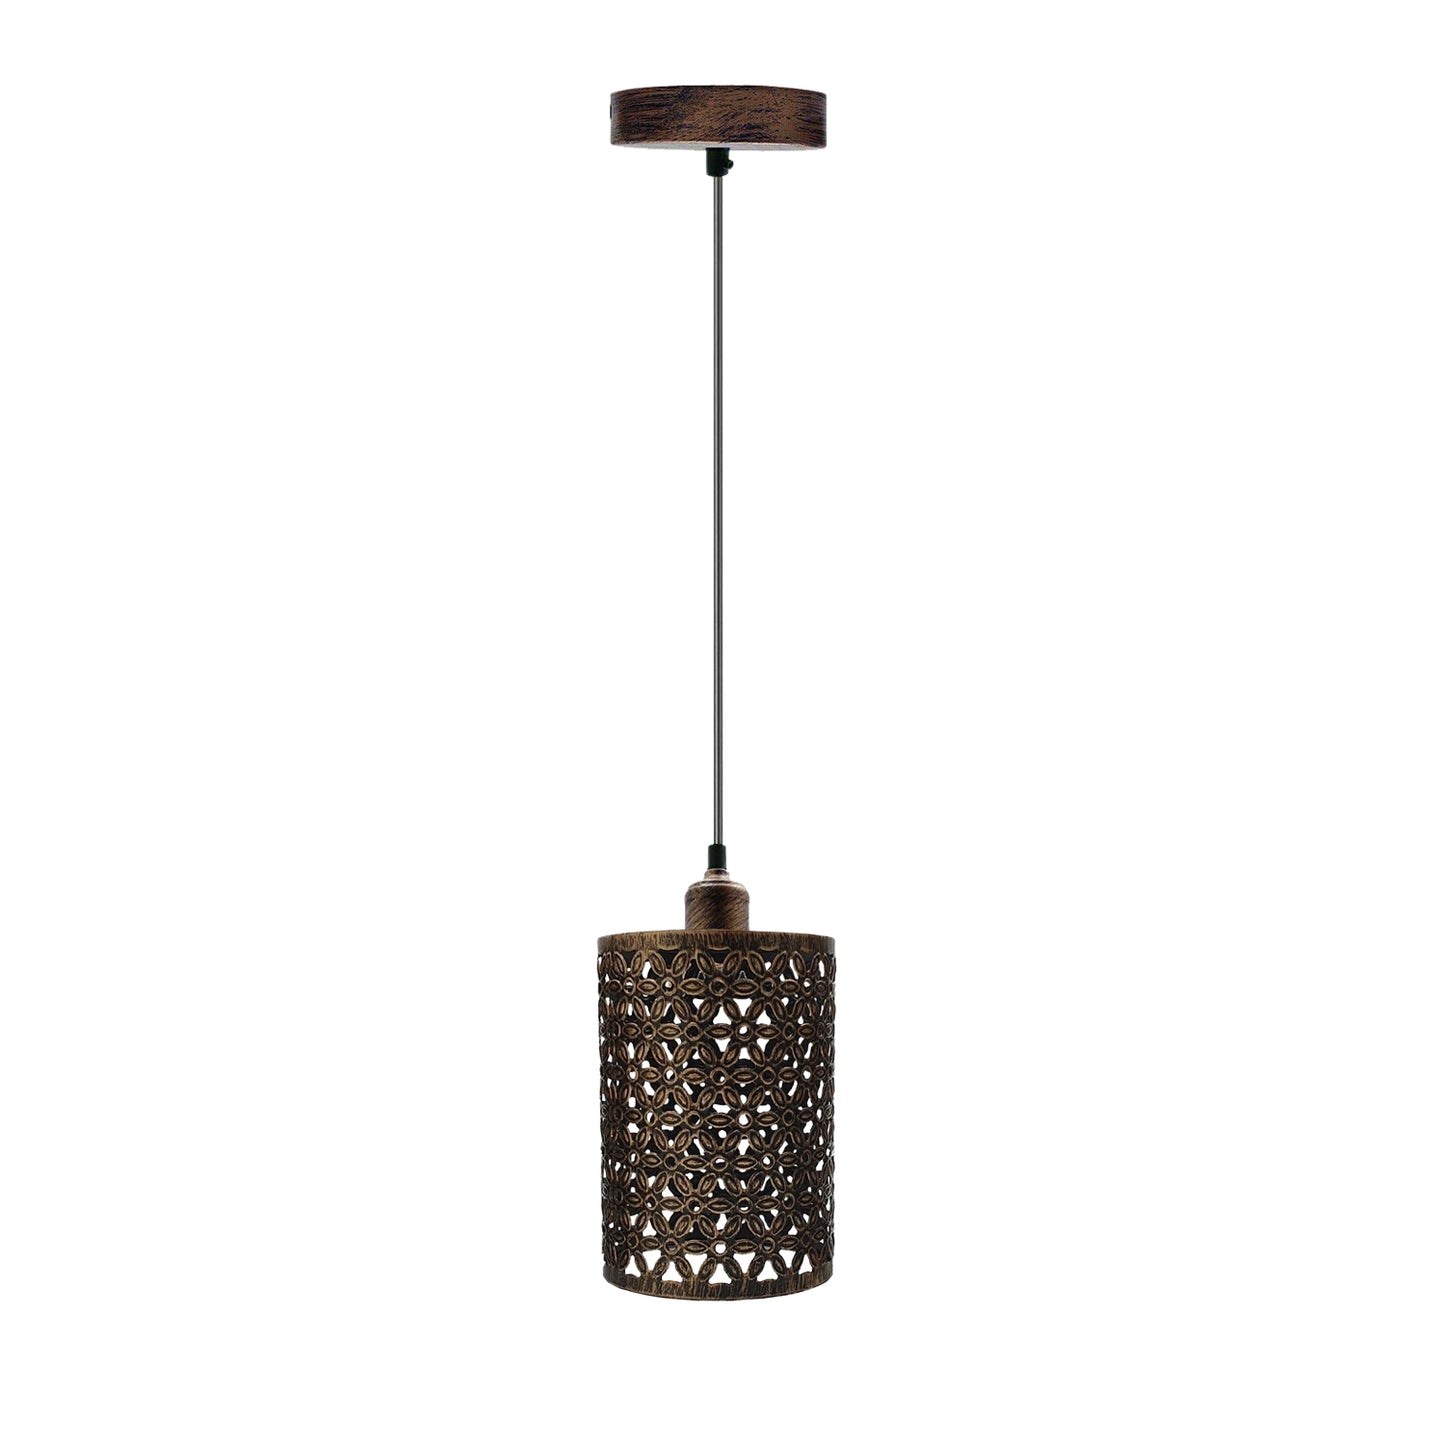 Brushed Copper Decorate Hollow Combined Guard Cage Pendant Light